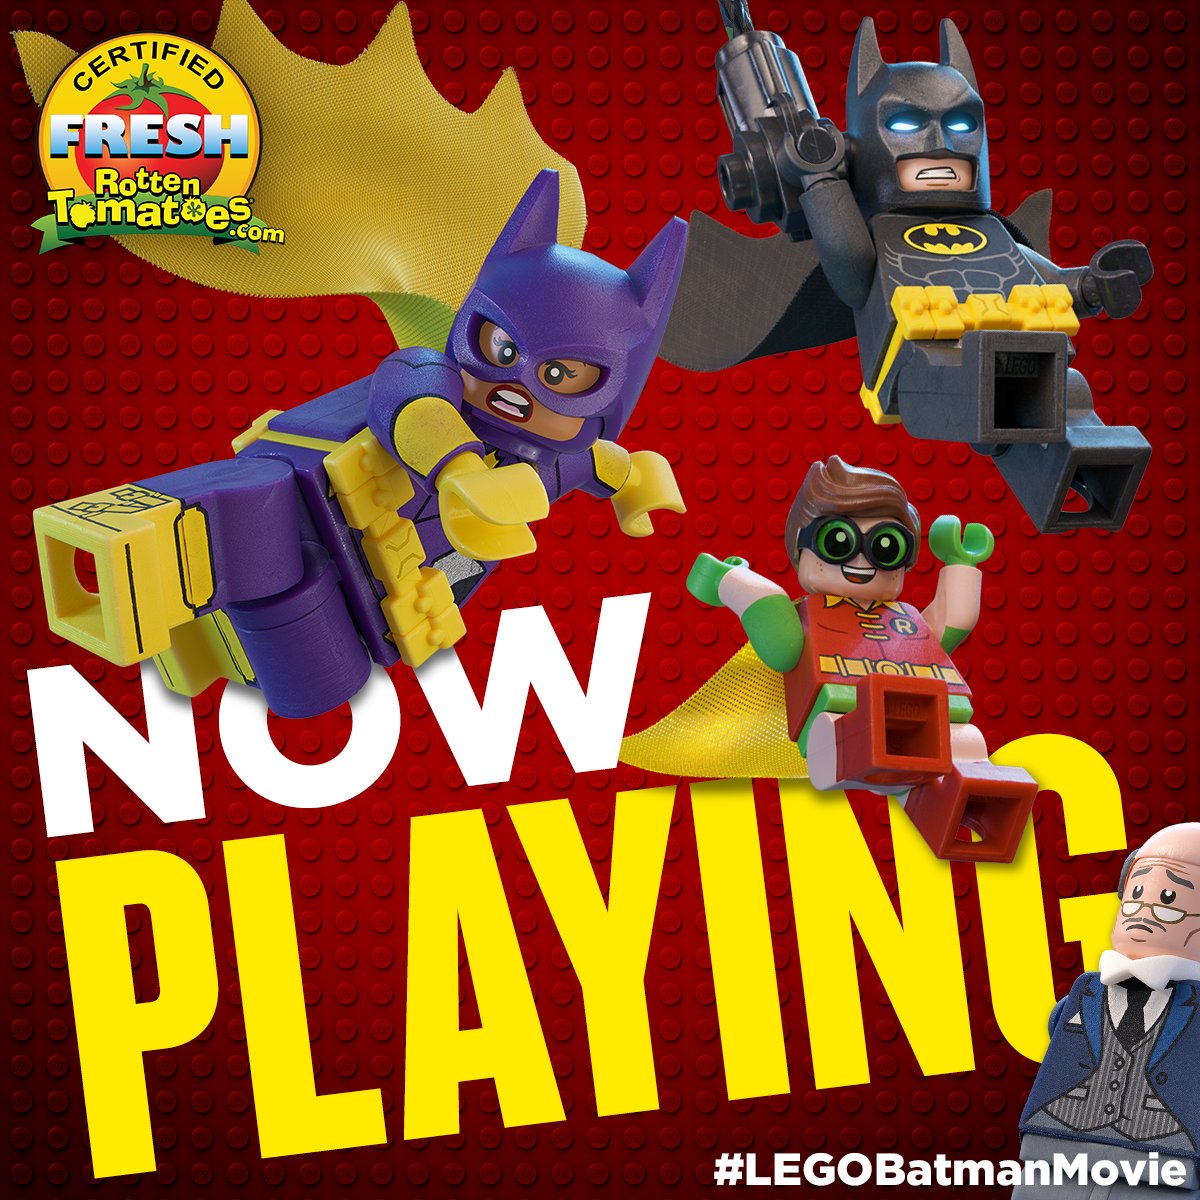 fragment skille sig ud Fra LEGO Batman on Twitter: "LEGO Batman has some super friends.  #LEGOBatmanMovie NOW PLAYING in theaters! https://t.co/SiaO71NXJK" / Twitter